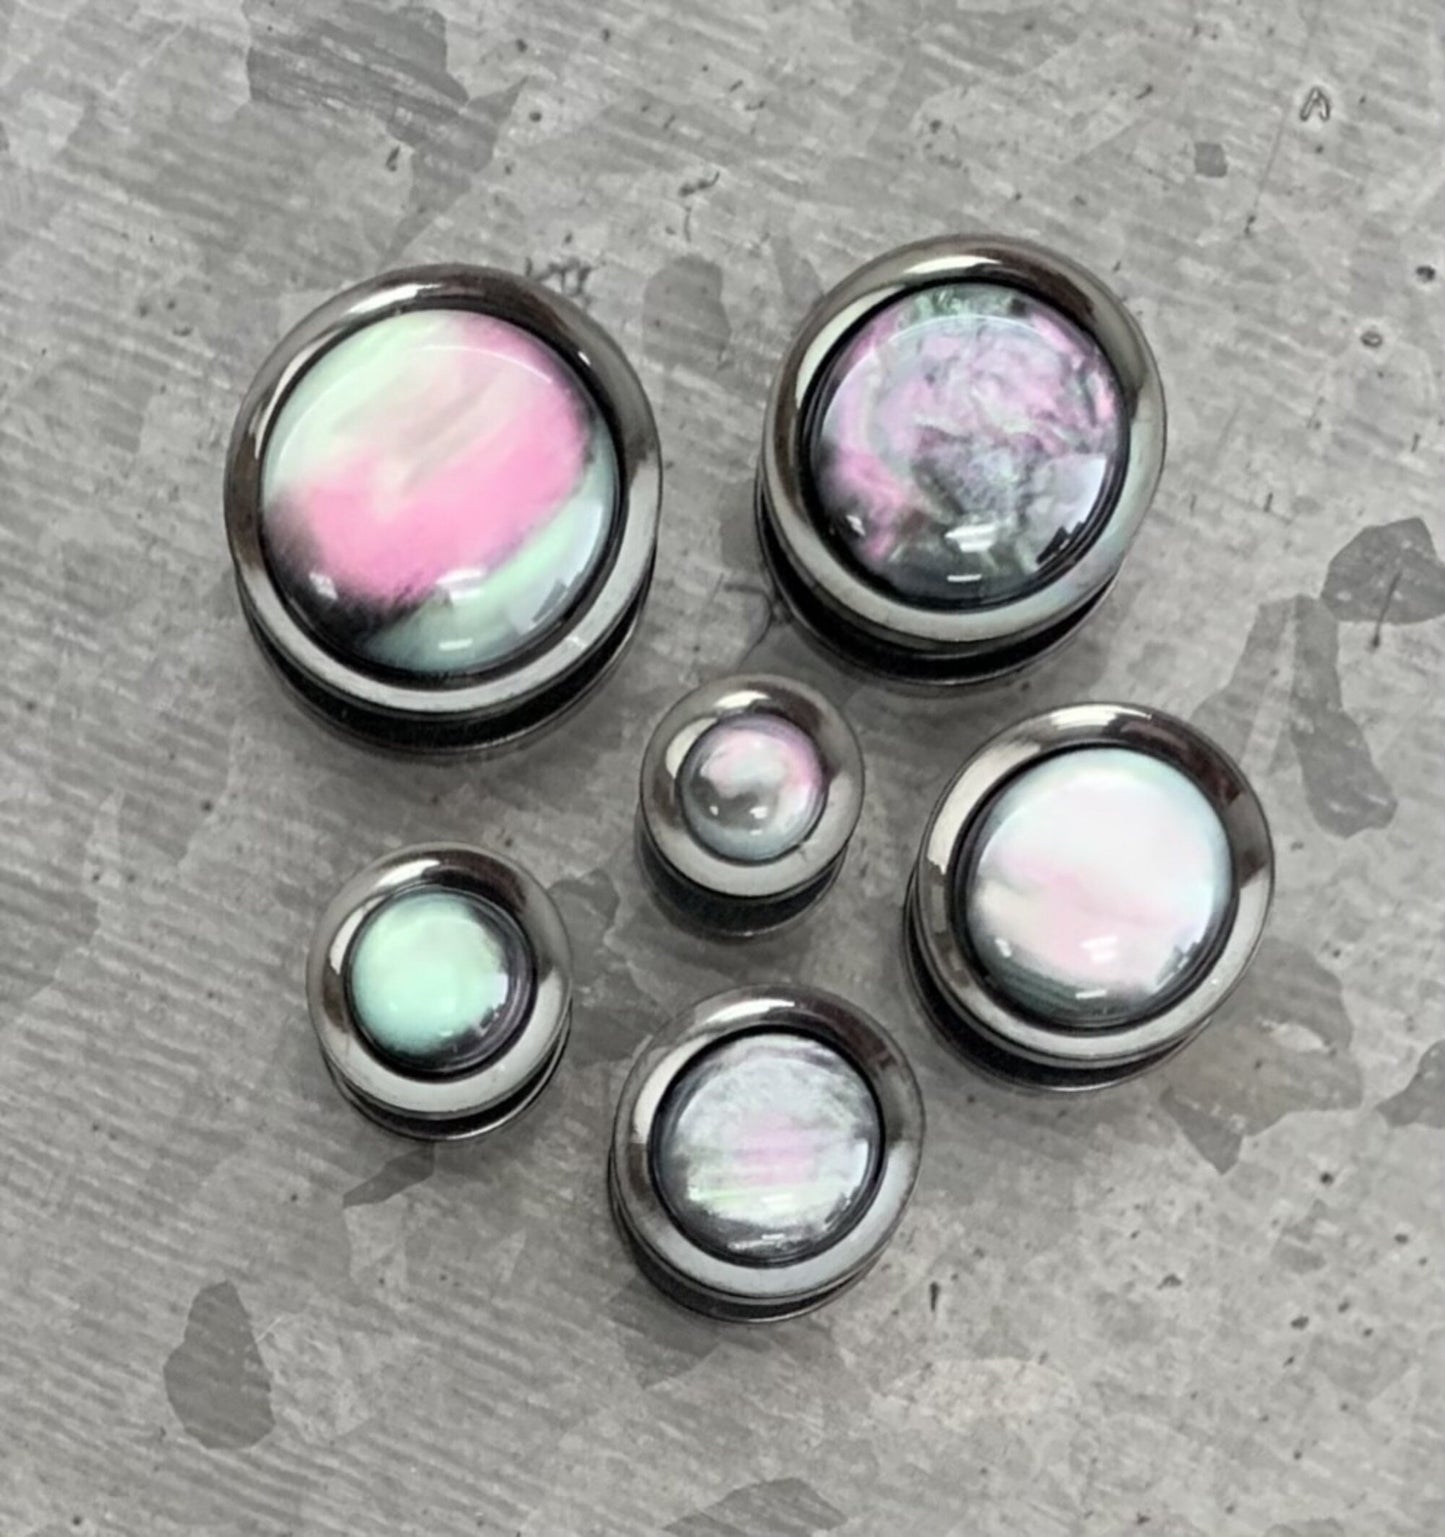 PAIR of Unique Iridescent Shell Black Screw Fit Tunnels/Plugs - Gauges 0g (8mm) thru 5/8" (16mm) available!